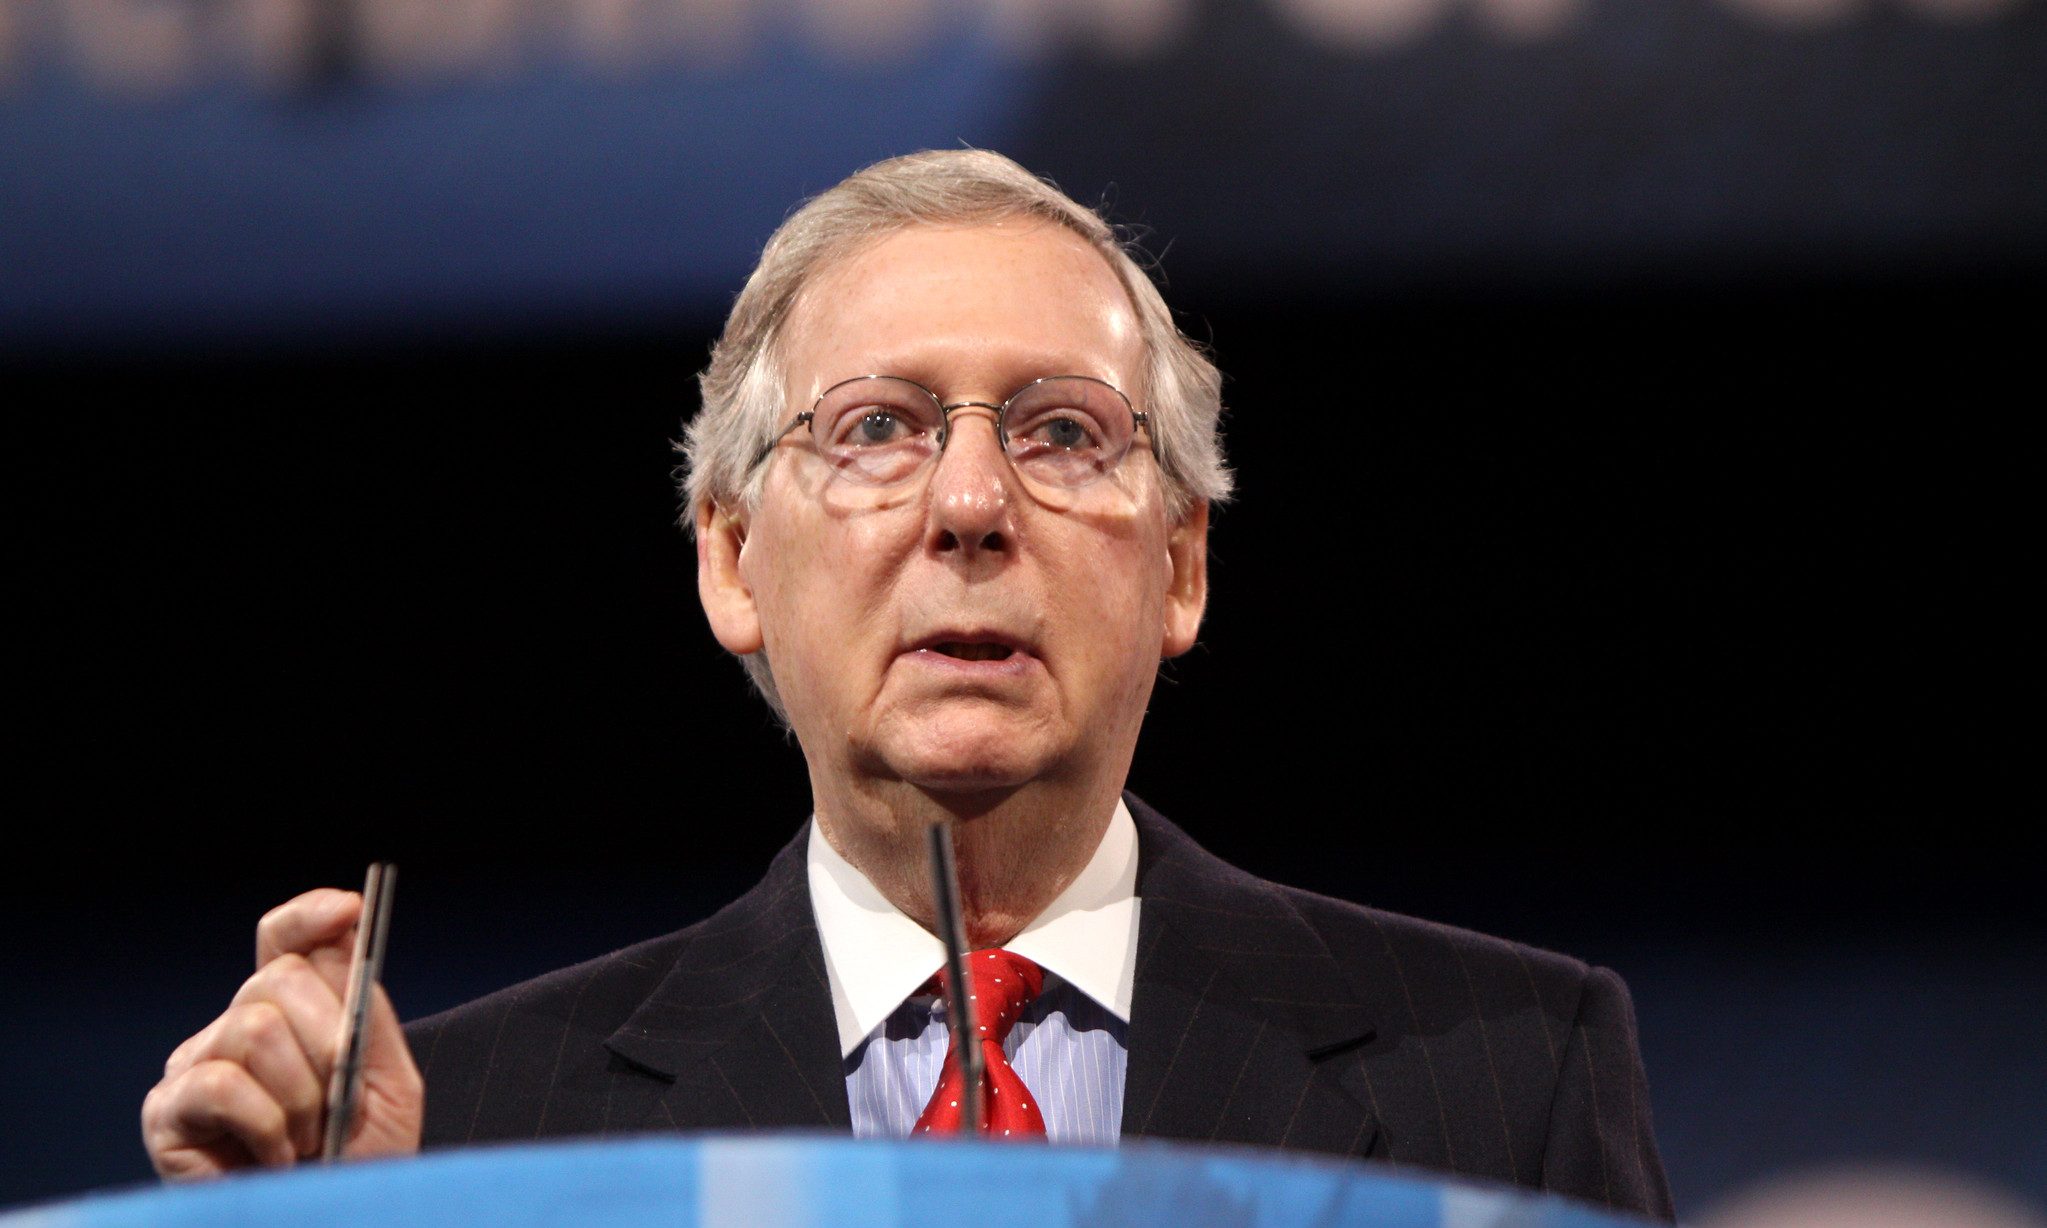 Mitch McConnell speaks at a conference